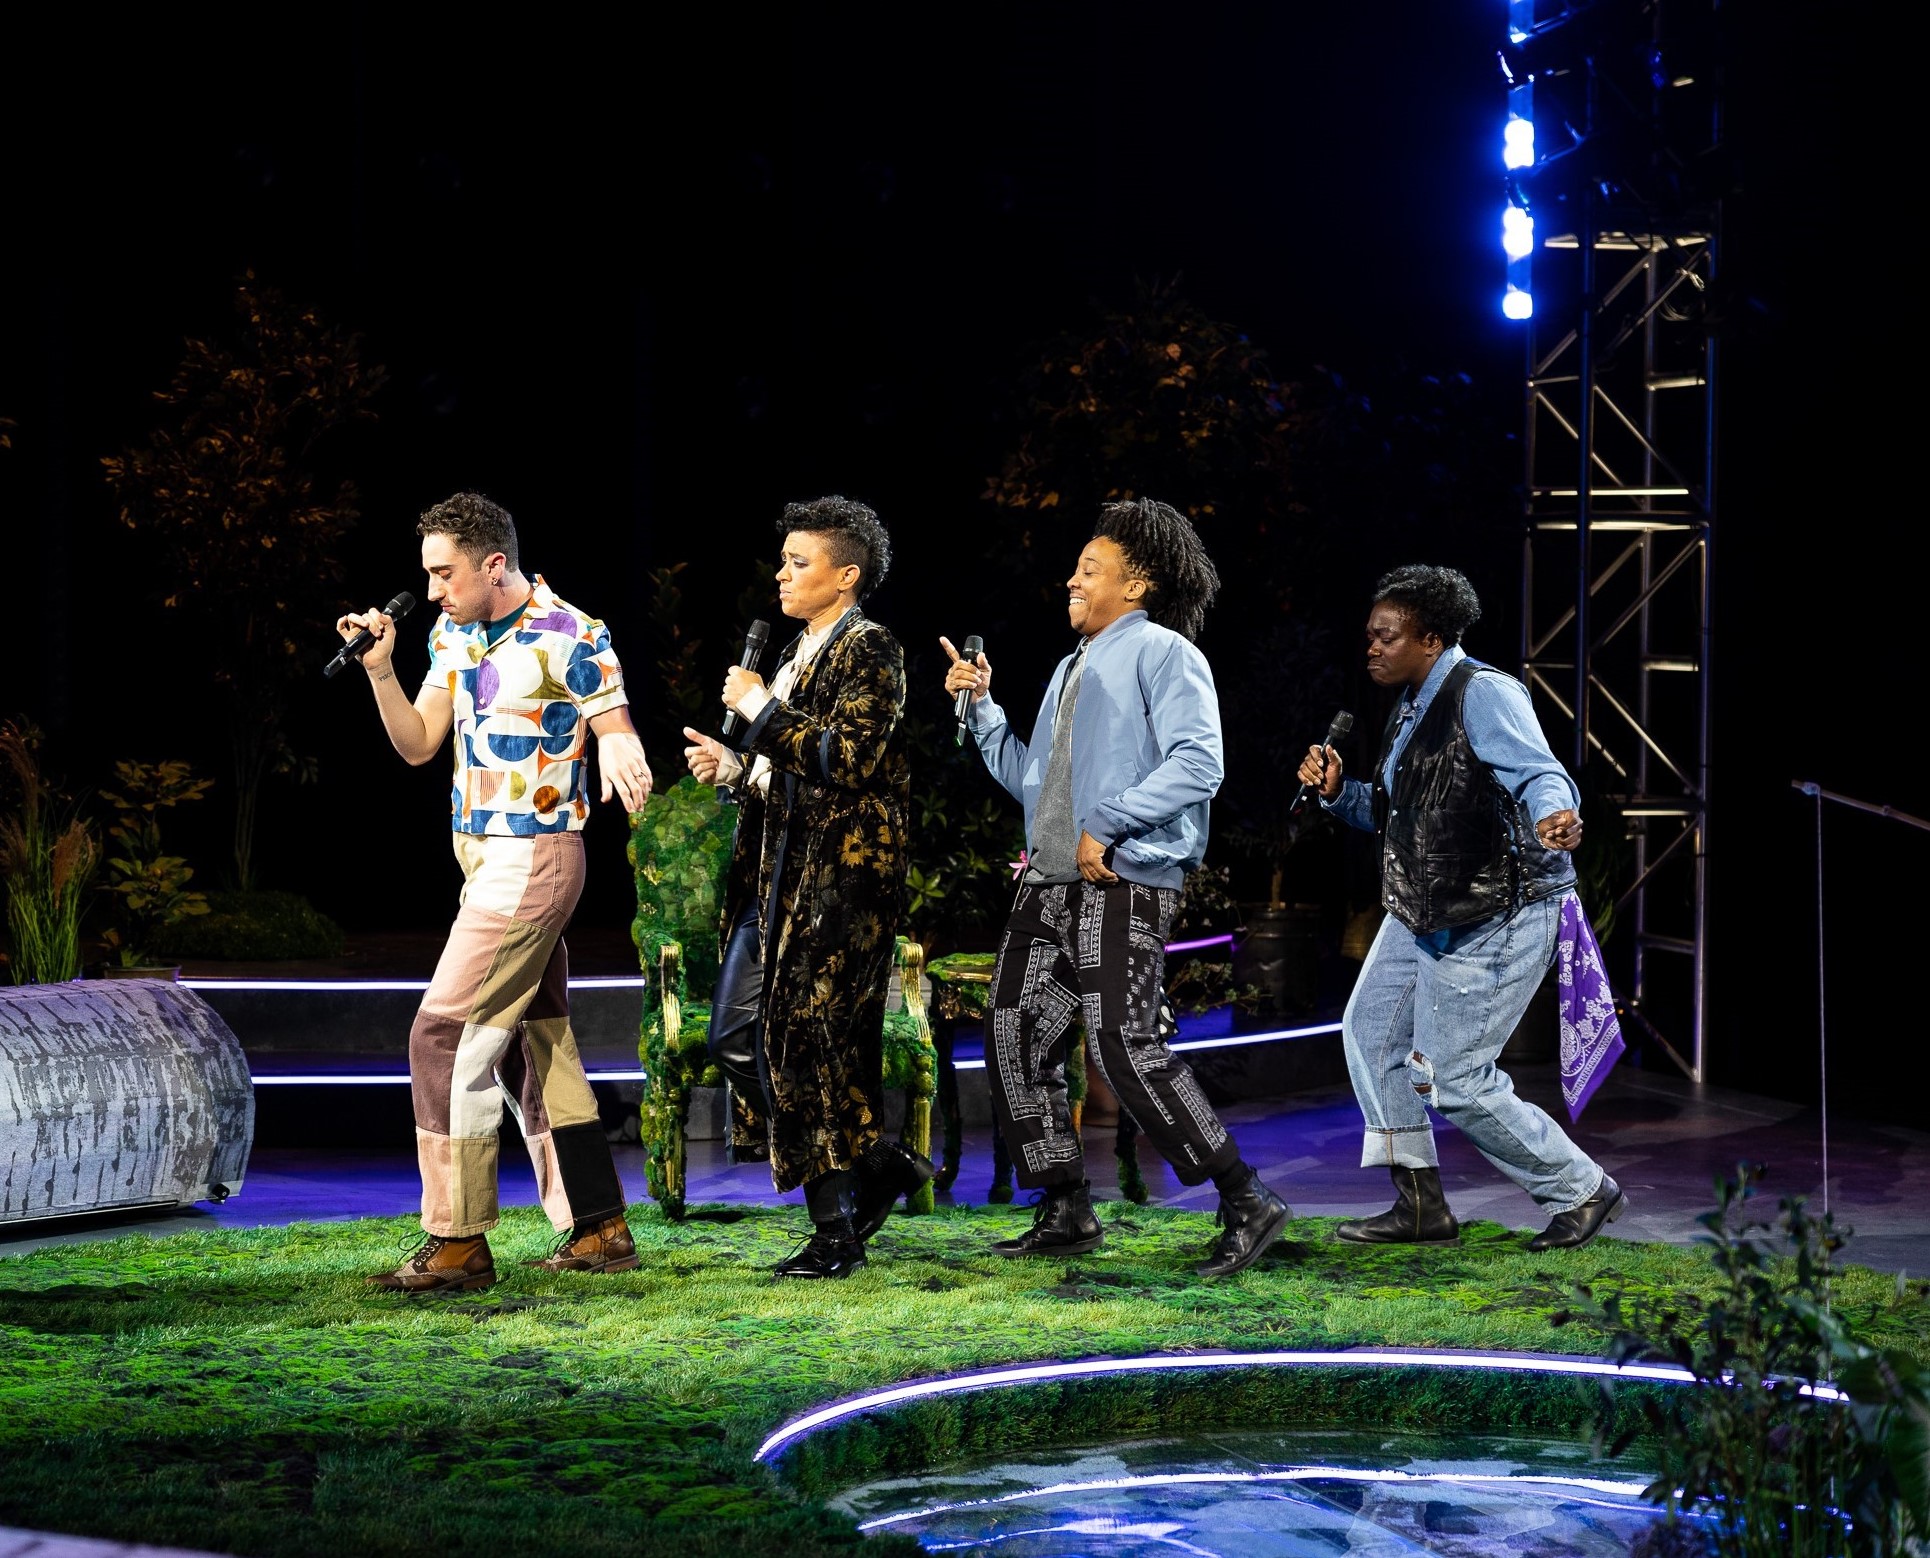 (L-R) Cody Sloan, Rami Margron, Esco Jouléy and Taiwo Sokan in La Jolla Playhouse’s production of AS YOU LIKE IT, by William Shakespeare, co-directed by Christopher Ashley and Will Davis, running through December 11, produced in association with Diversionary Theatre; photo by Rich Soublet II.